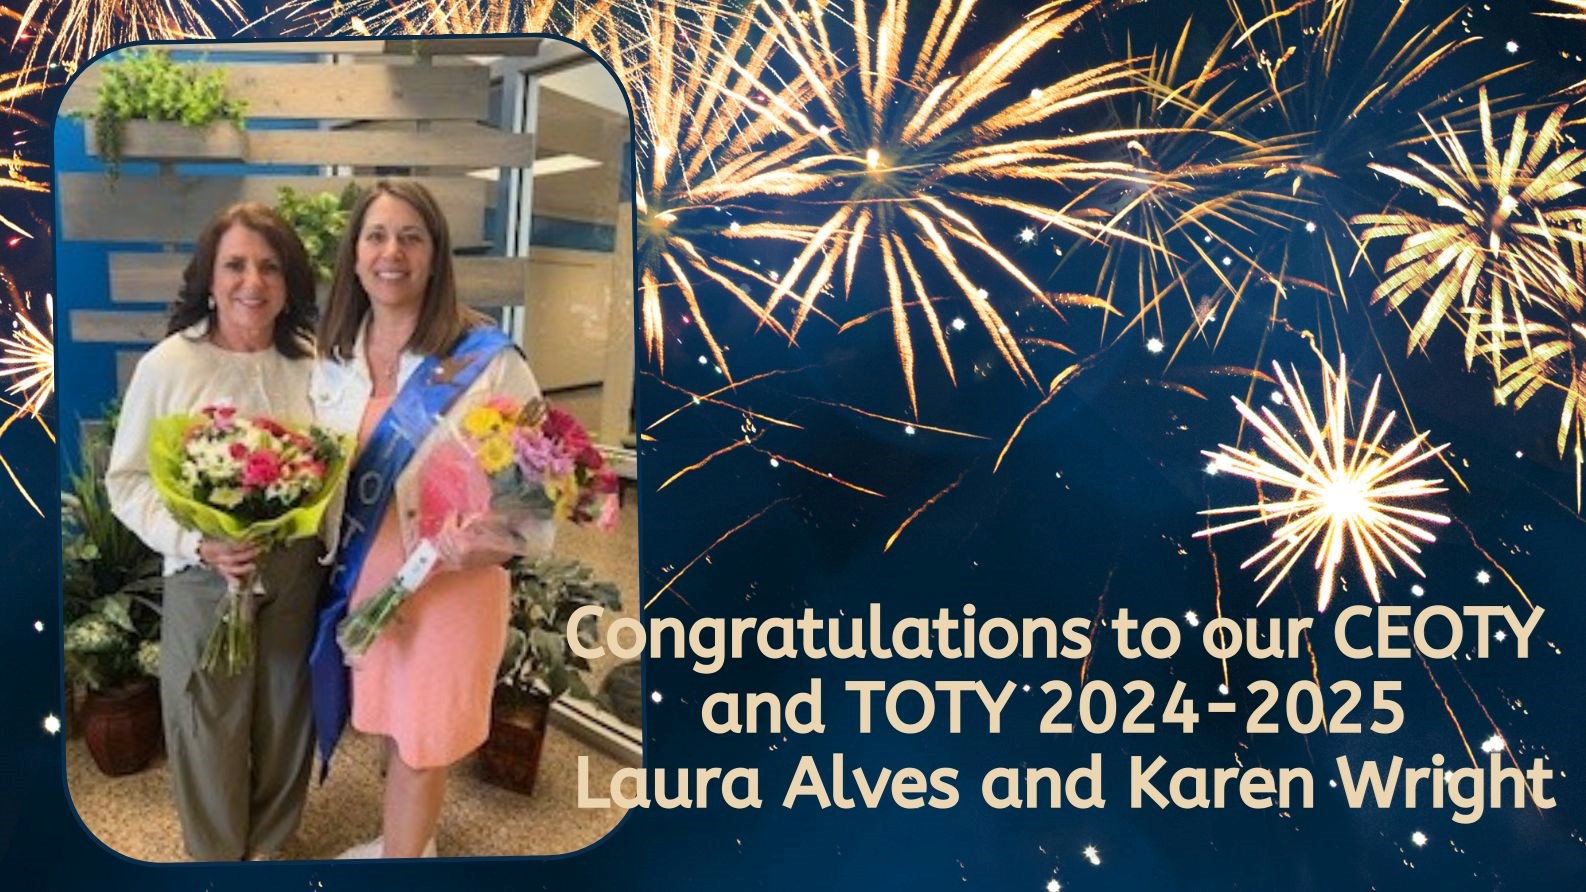 Congratulations to our CEOTY and TOTY 2024-2025 Laura Alves and Karen Wright